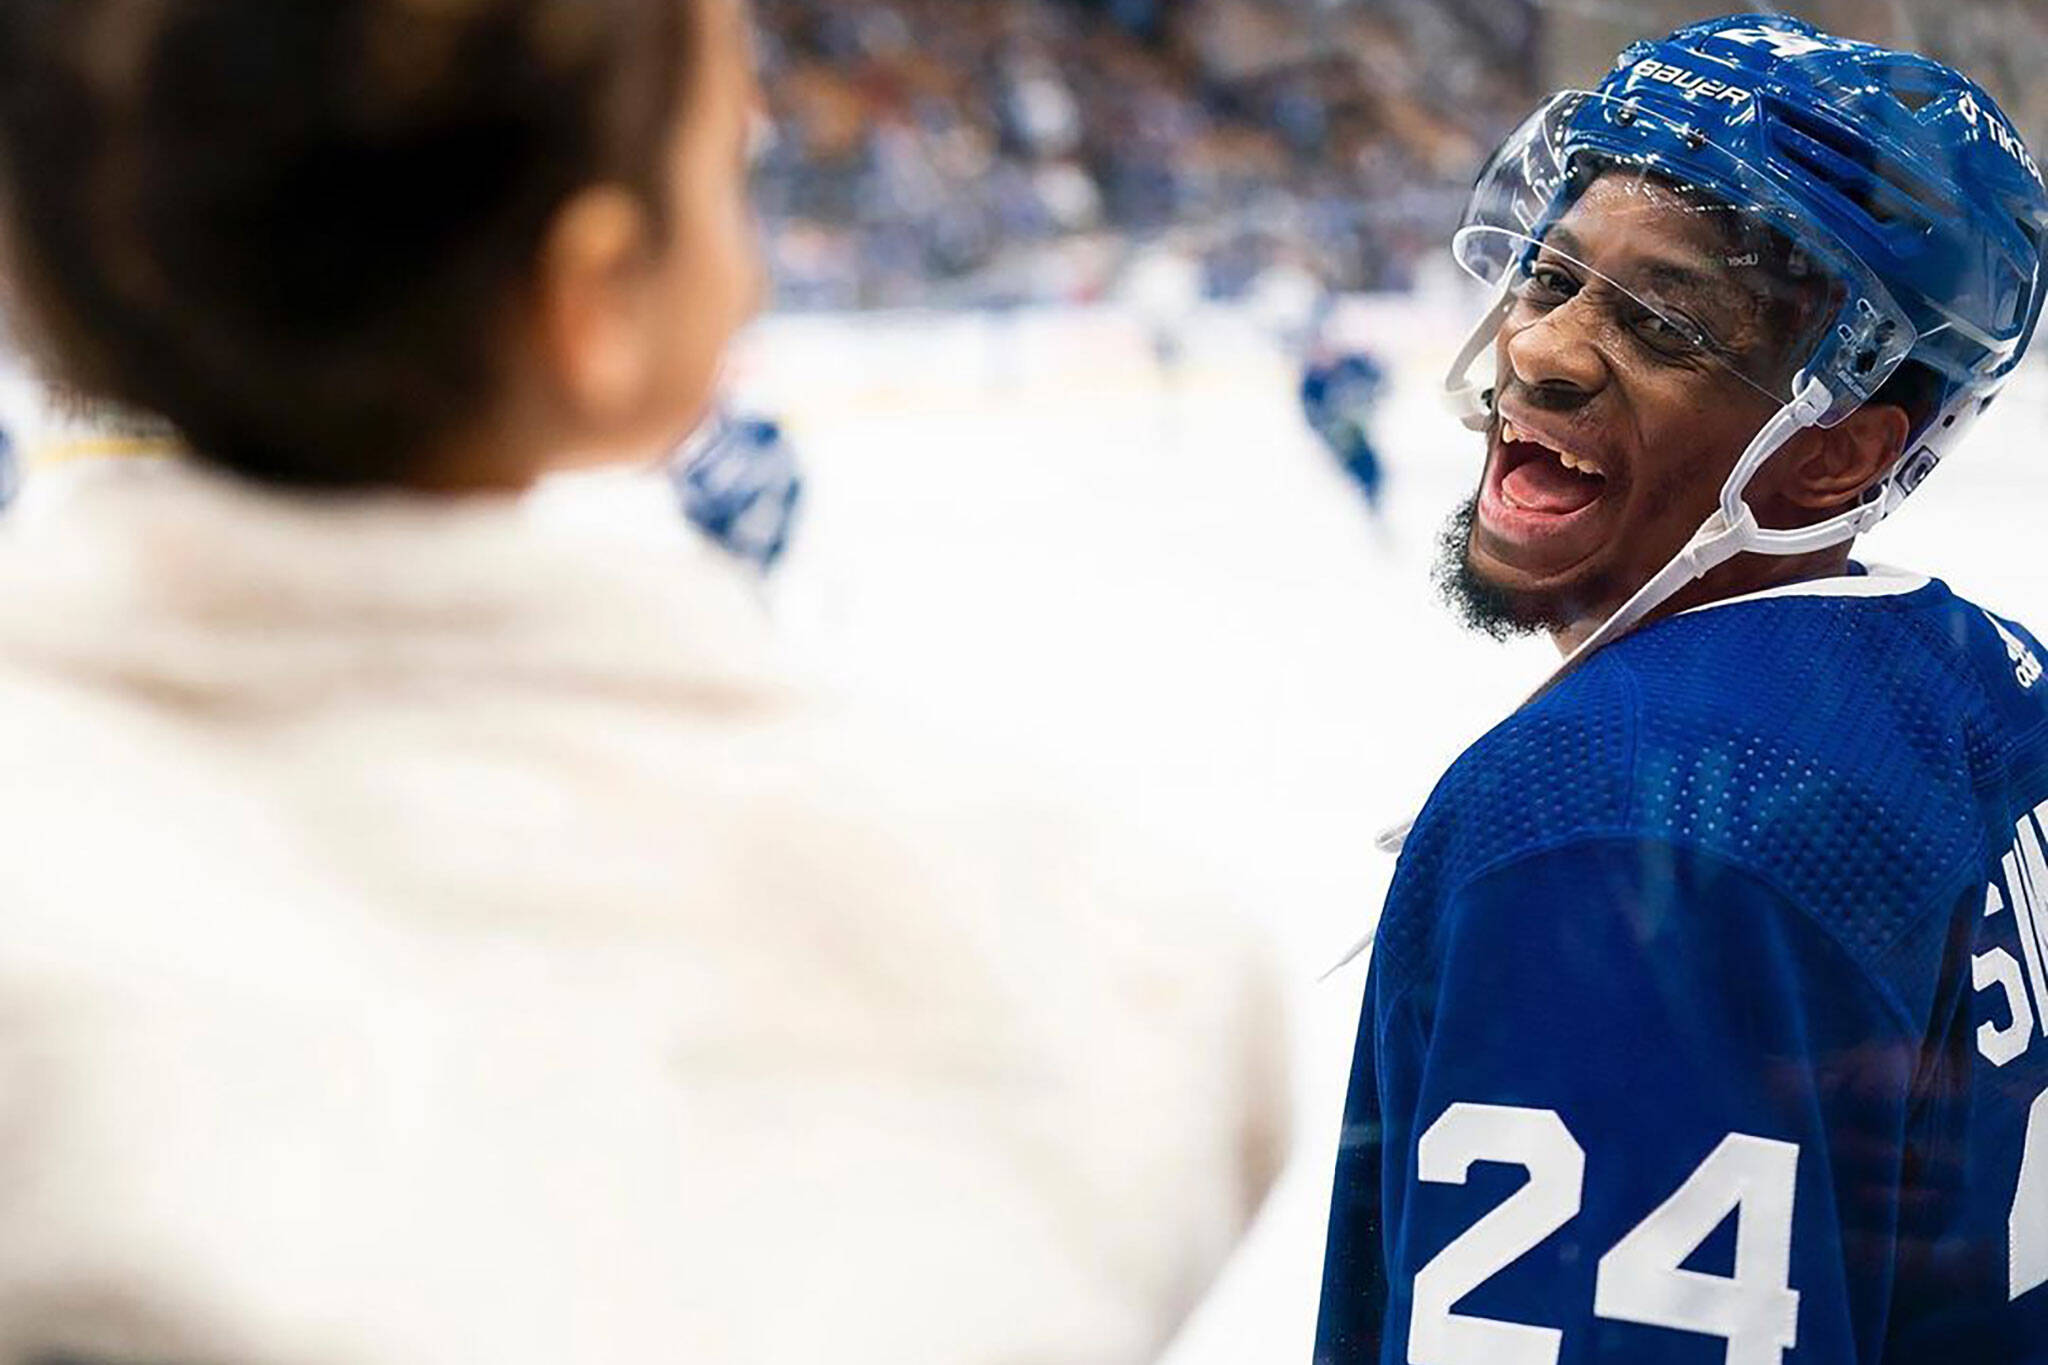 Wayne Simmonds isn't bitter about his limited role with the Maple